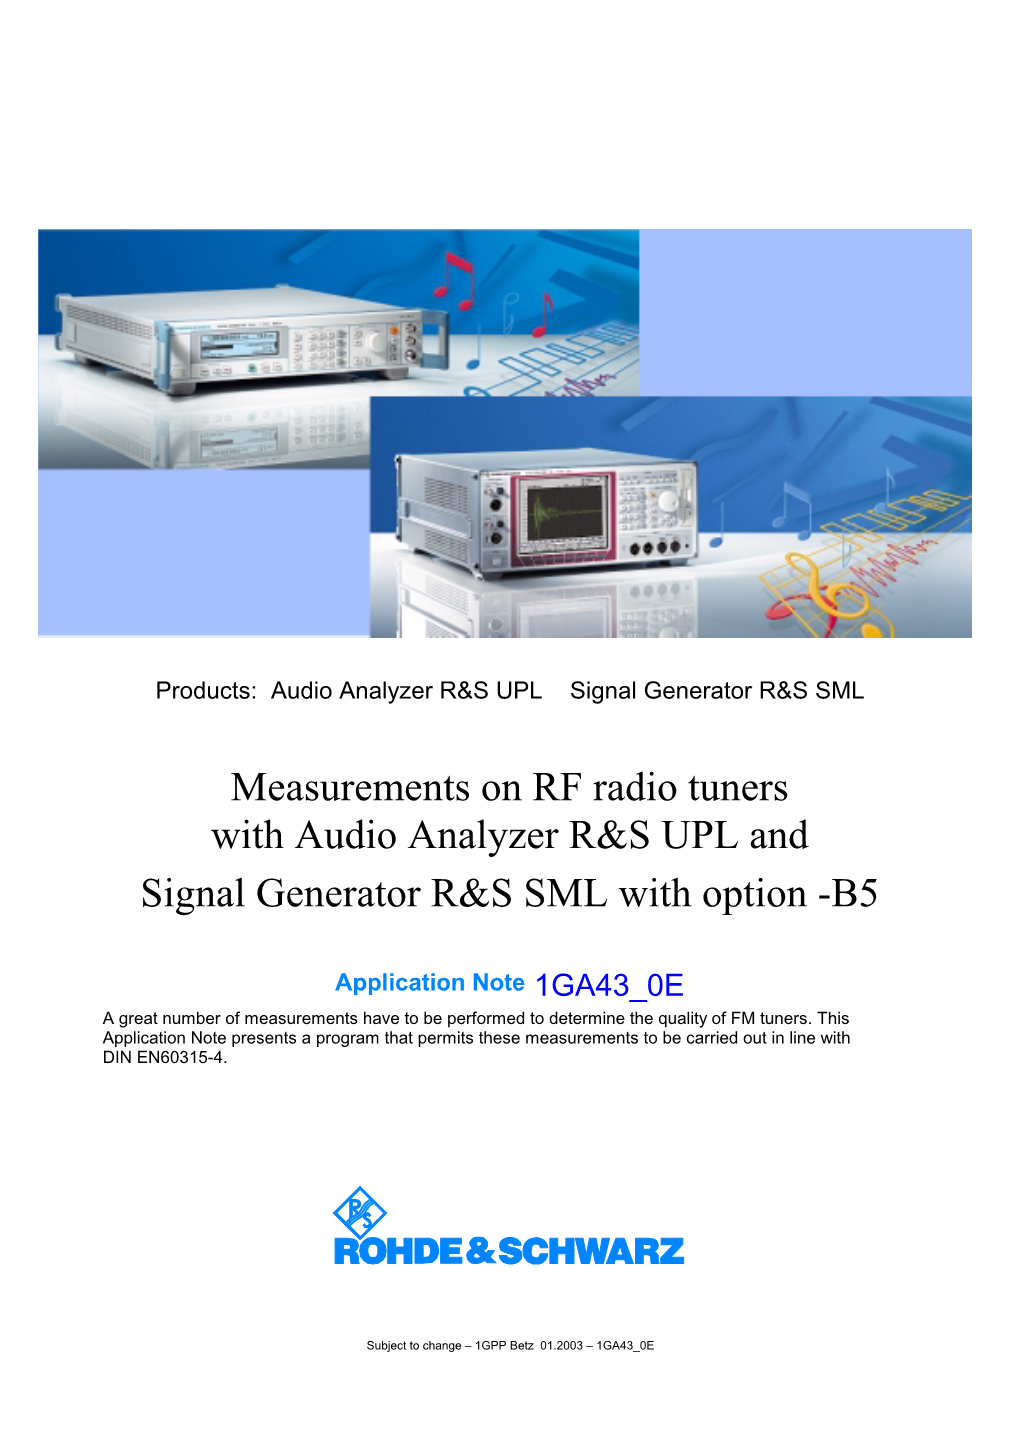 Measurements on RF Radio Tuners with Audio Analyzer R&S UPL and Signal Generator R&S SML with Option -B5